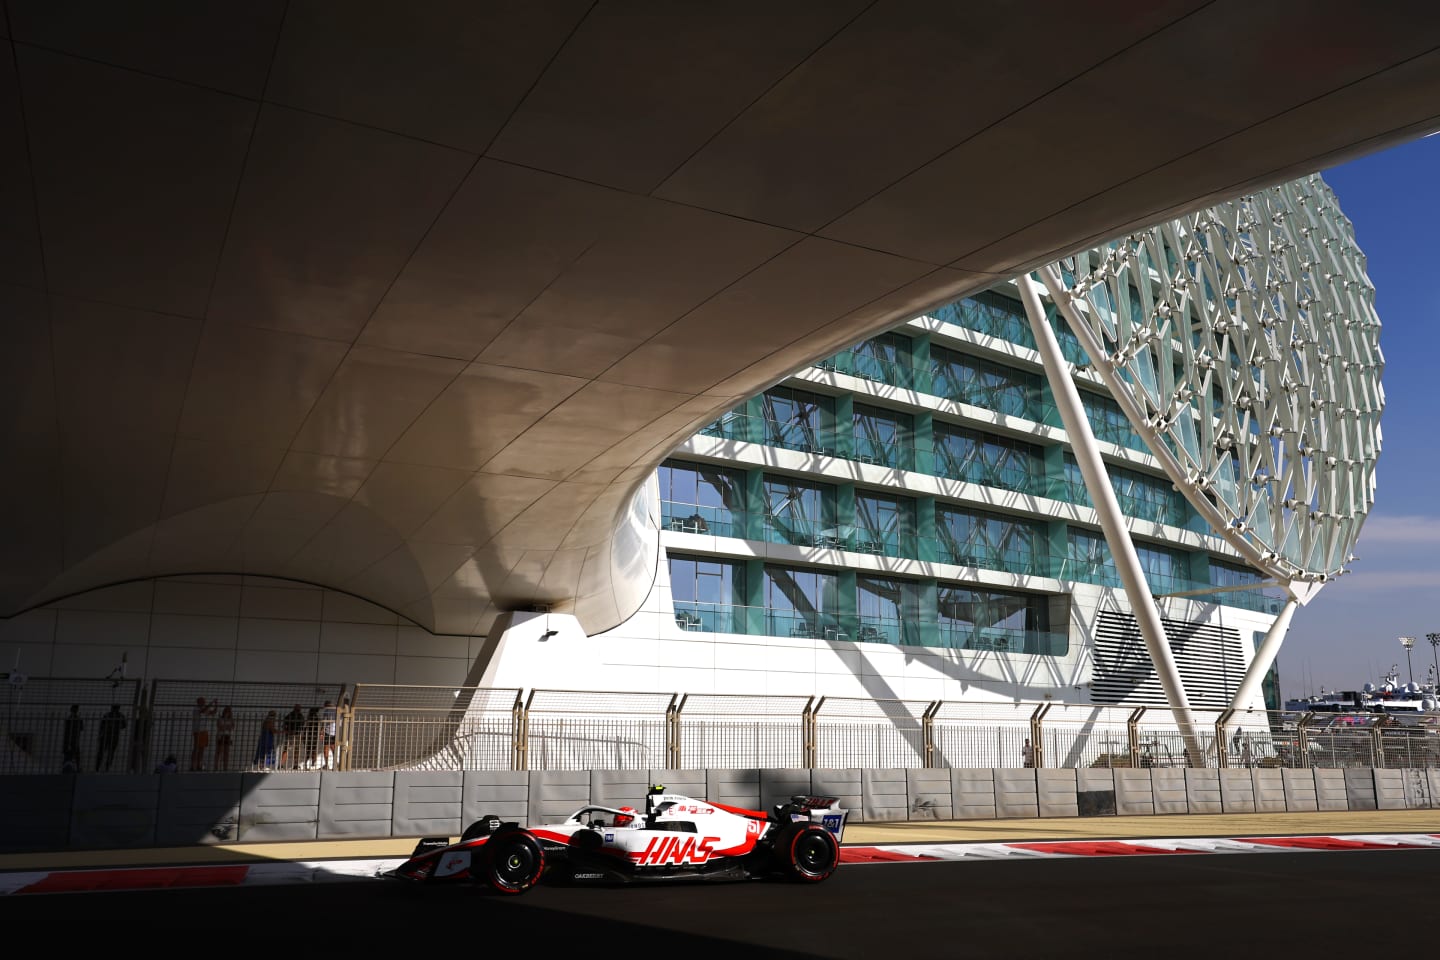 ABU DHABI, UNITED ARAB EMIRATES - NOVEMBER 18: Pietro Fittipaldi of Brazil driving the (51) Haas F1 VF-22 Ferrari on track during practice ahead of the F1 Grand Prix of Abu Dhabi at Yas Marina Circuit on November 18, 2022 in Abu Dhabi, United Arab Emirates. (Photo by Mark Thompson/Getty Images)